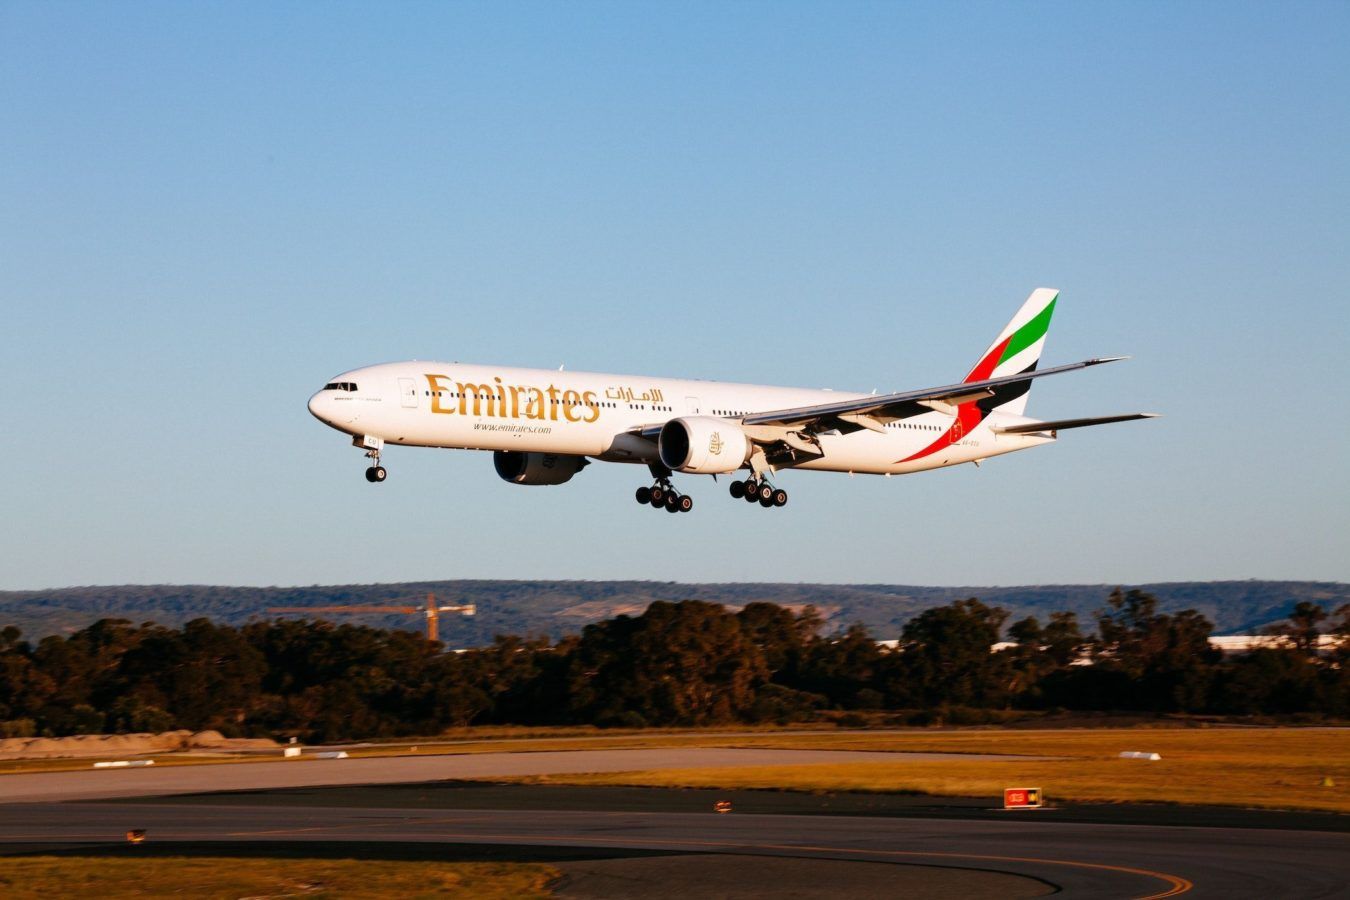 Emirates announces plans to accept Bitcoin as payment for flights